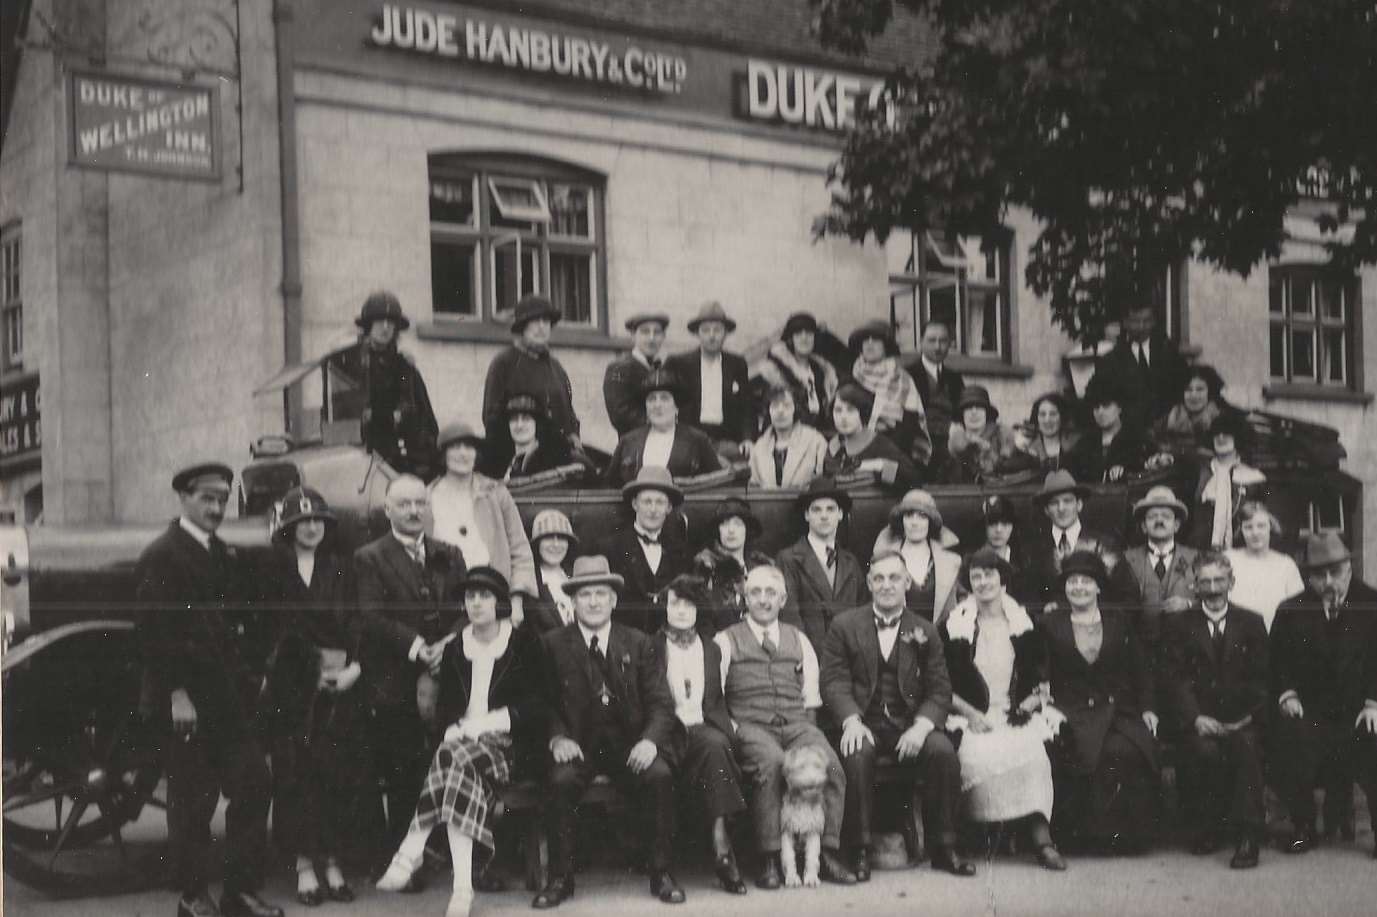 Pub regulars recreated this historical photo to mark the occasion